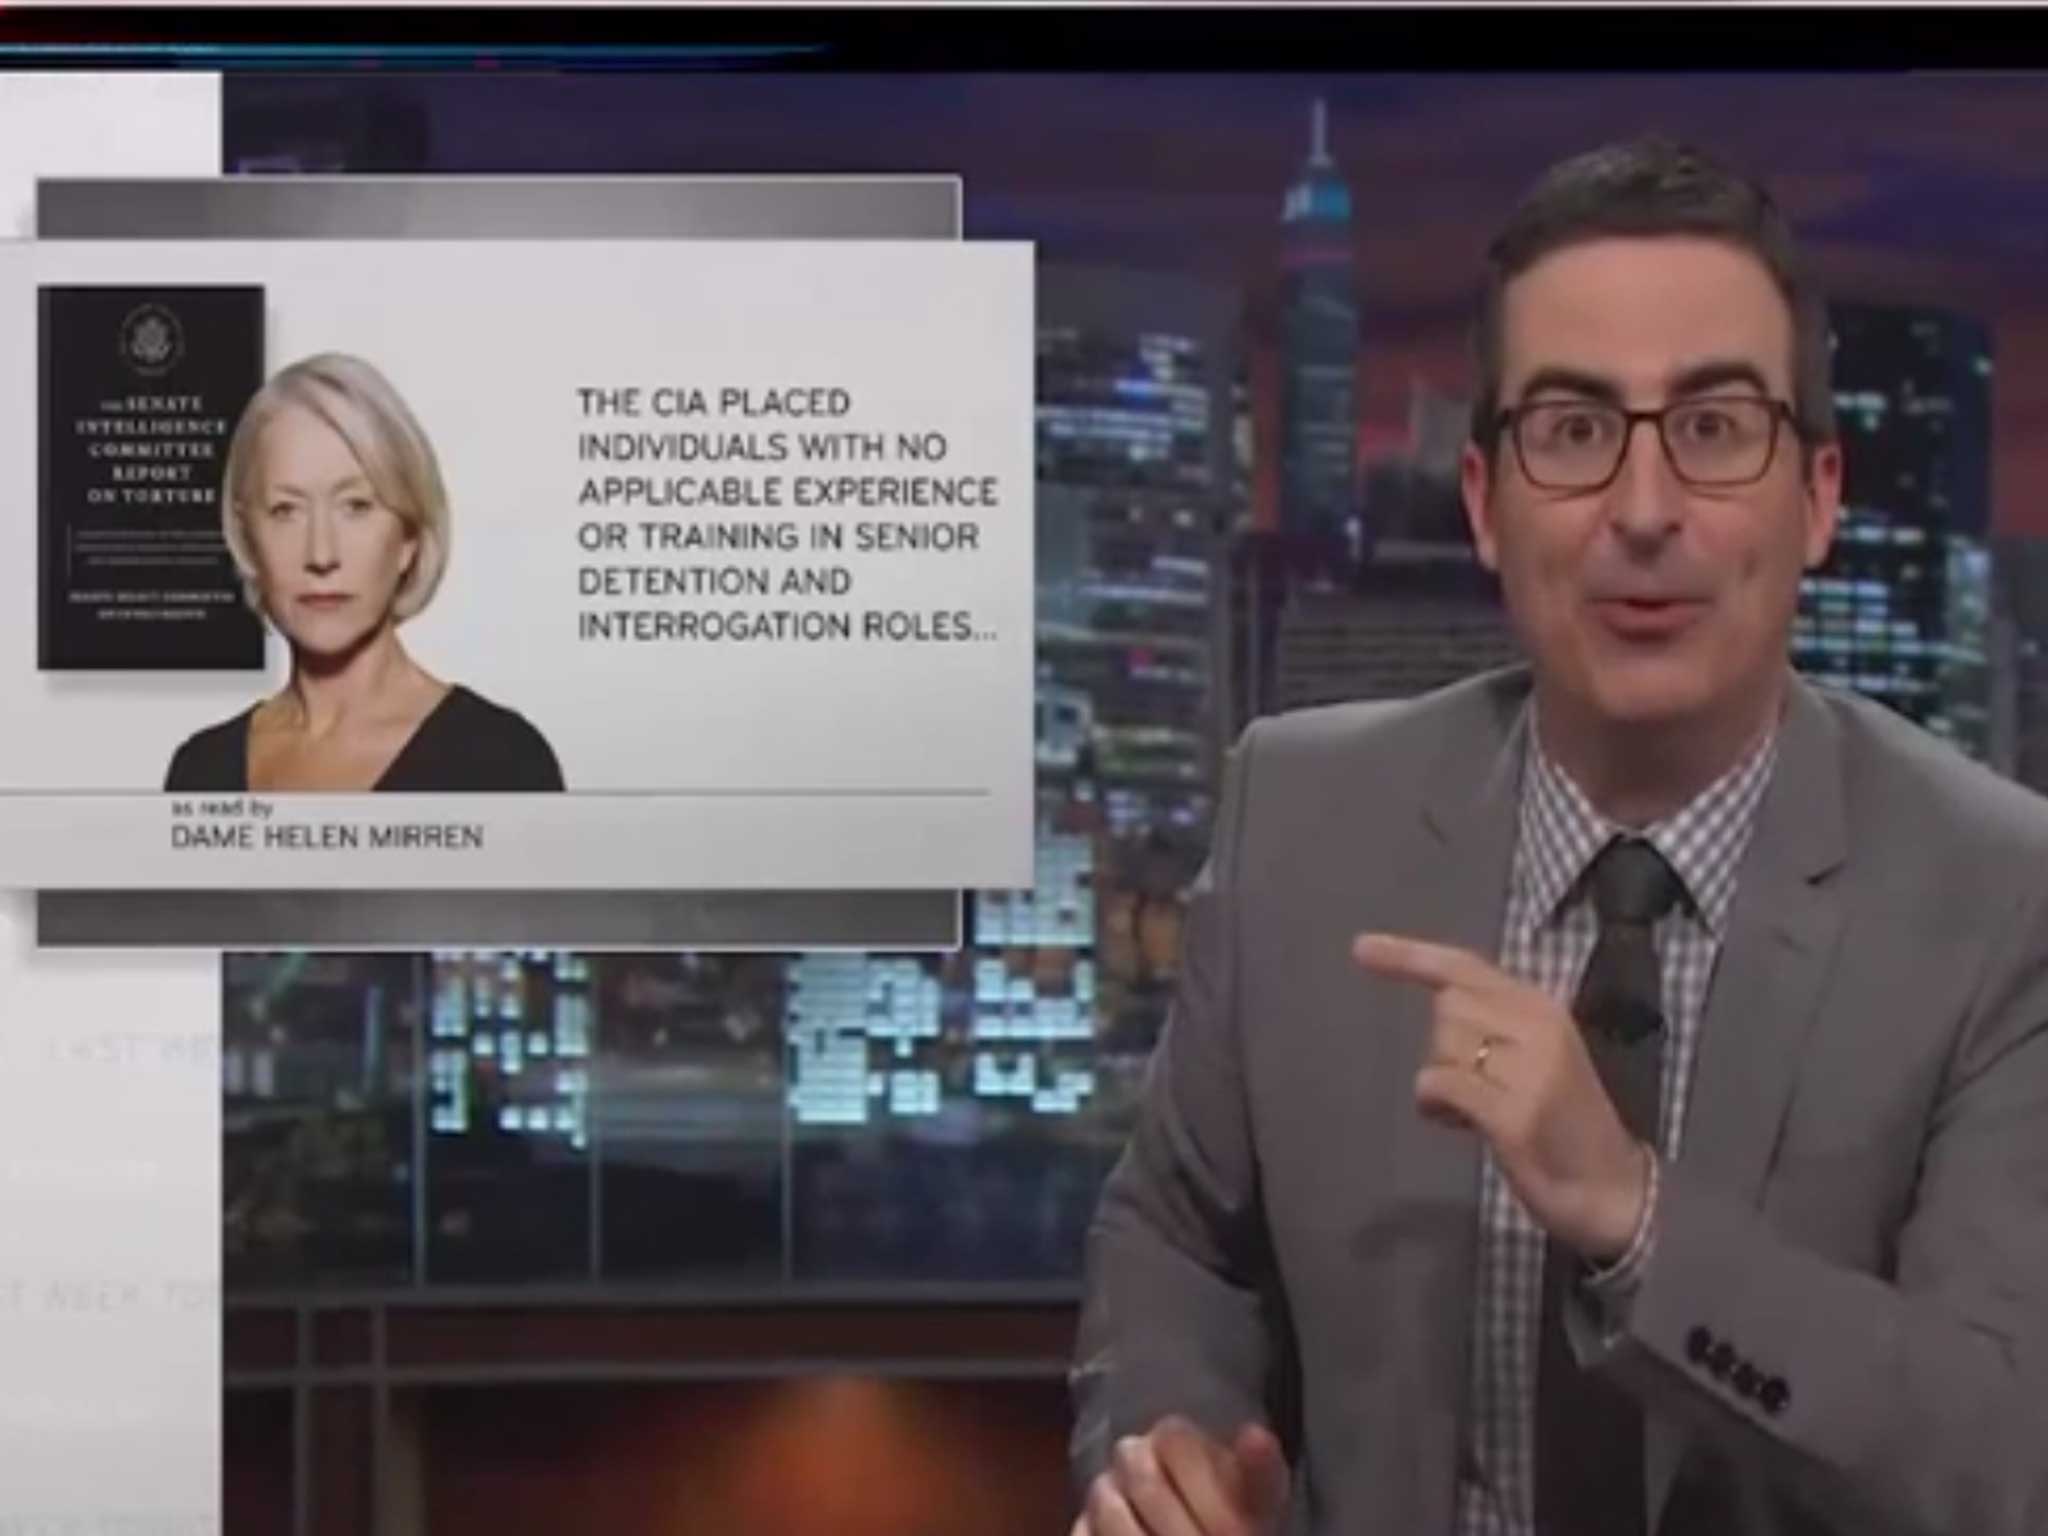 John Oliver attempts to interest the public on the torture report